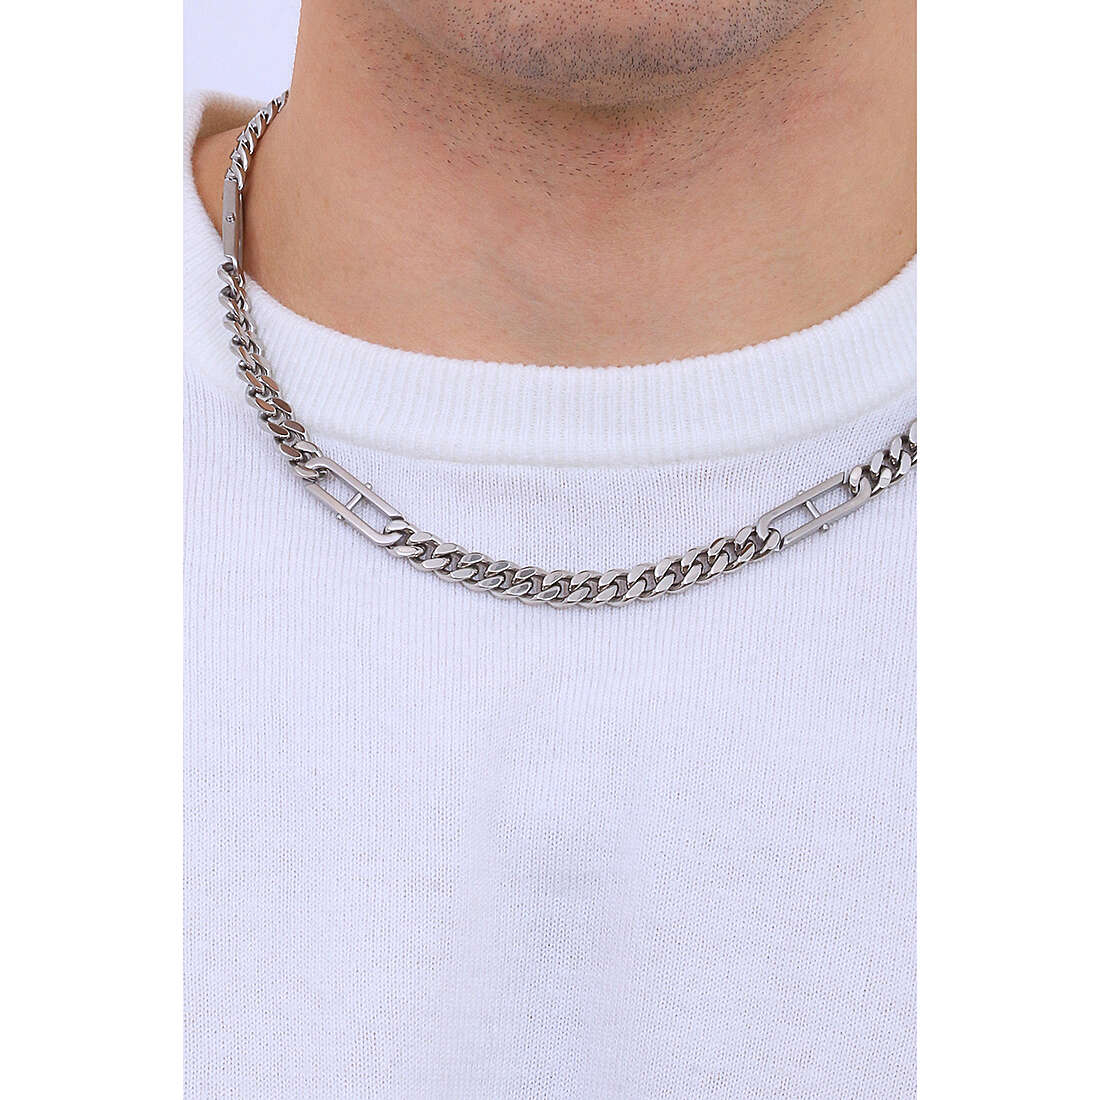 Fossil necklaces Heritage man JF04356040 wearing